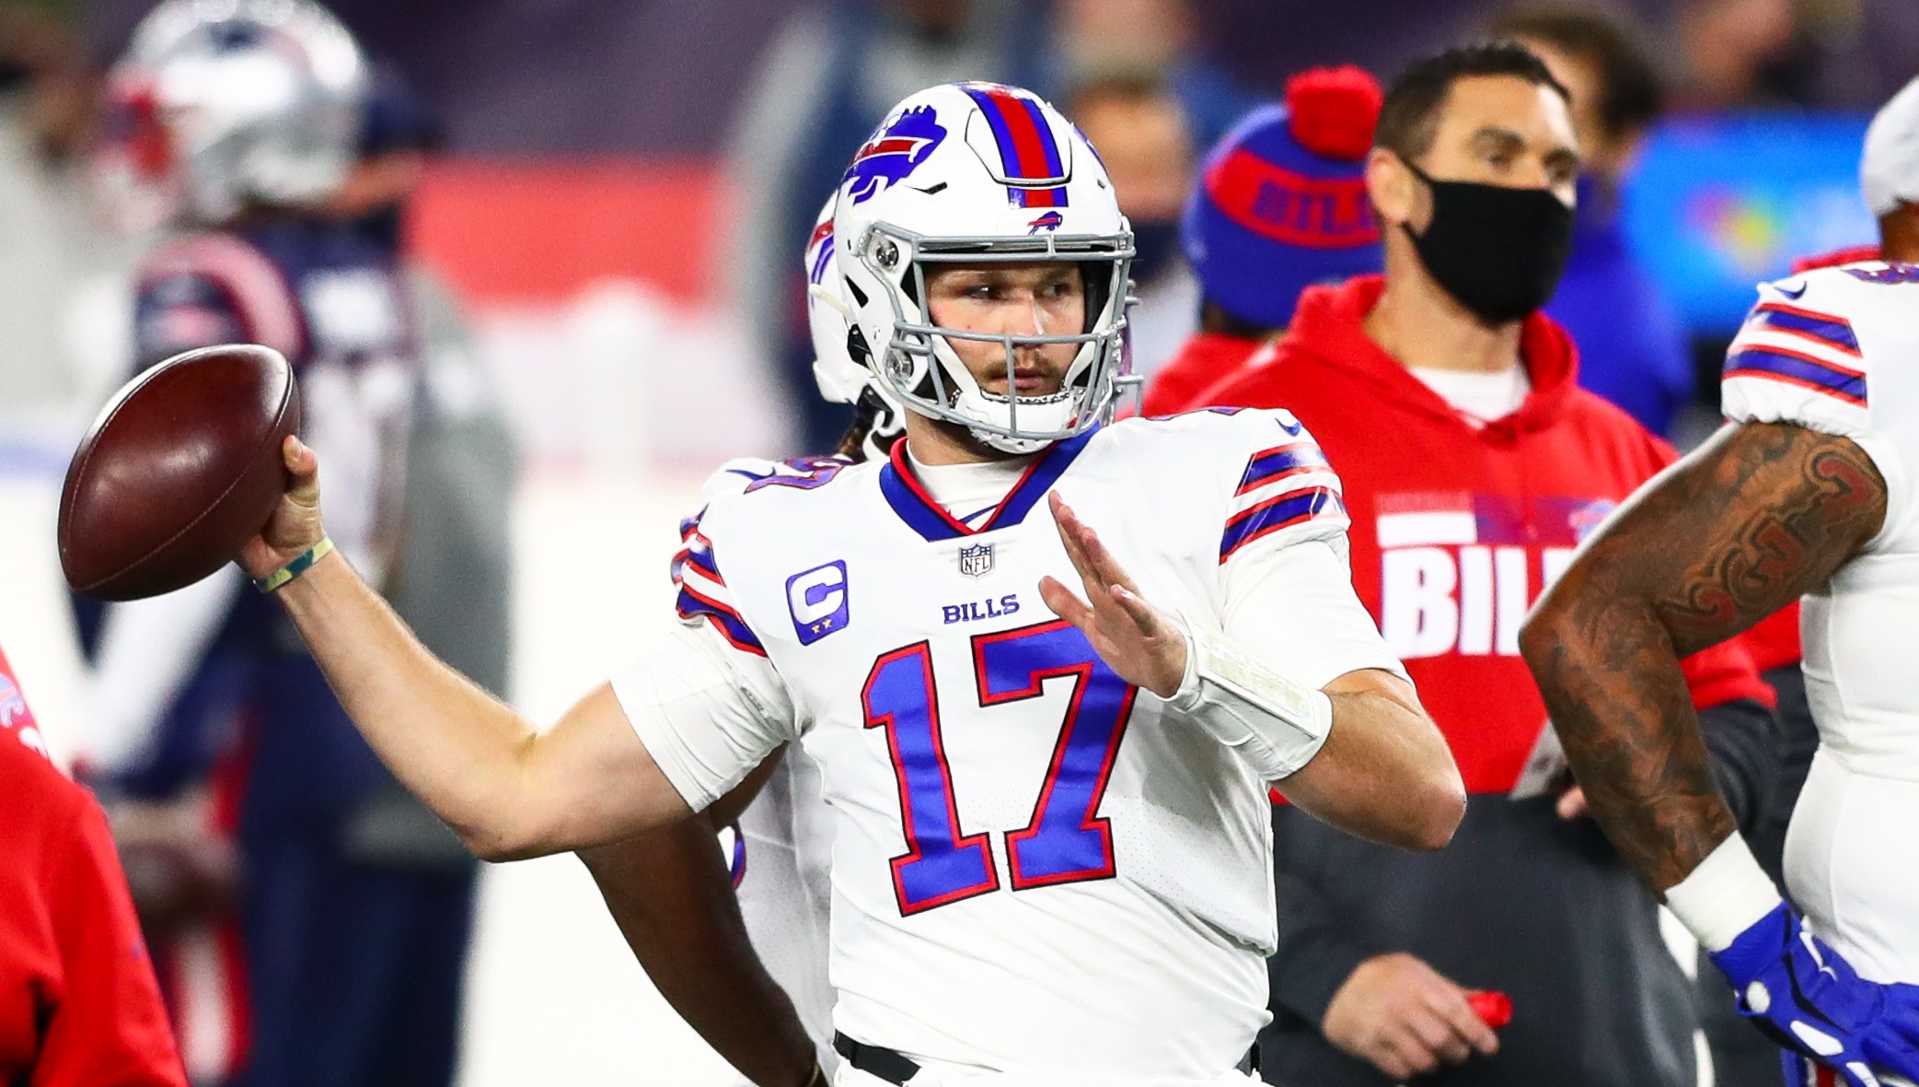 Josh Allen #17 of the Buffalo Bills warms up before a game against the New England Patriots at Gillette Stadium on December 28, 2020 in Foxborough, Massachusetts. (Photo by Adam Glanzman/Getty Images)